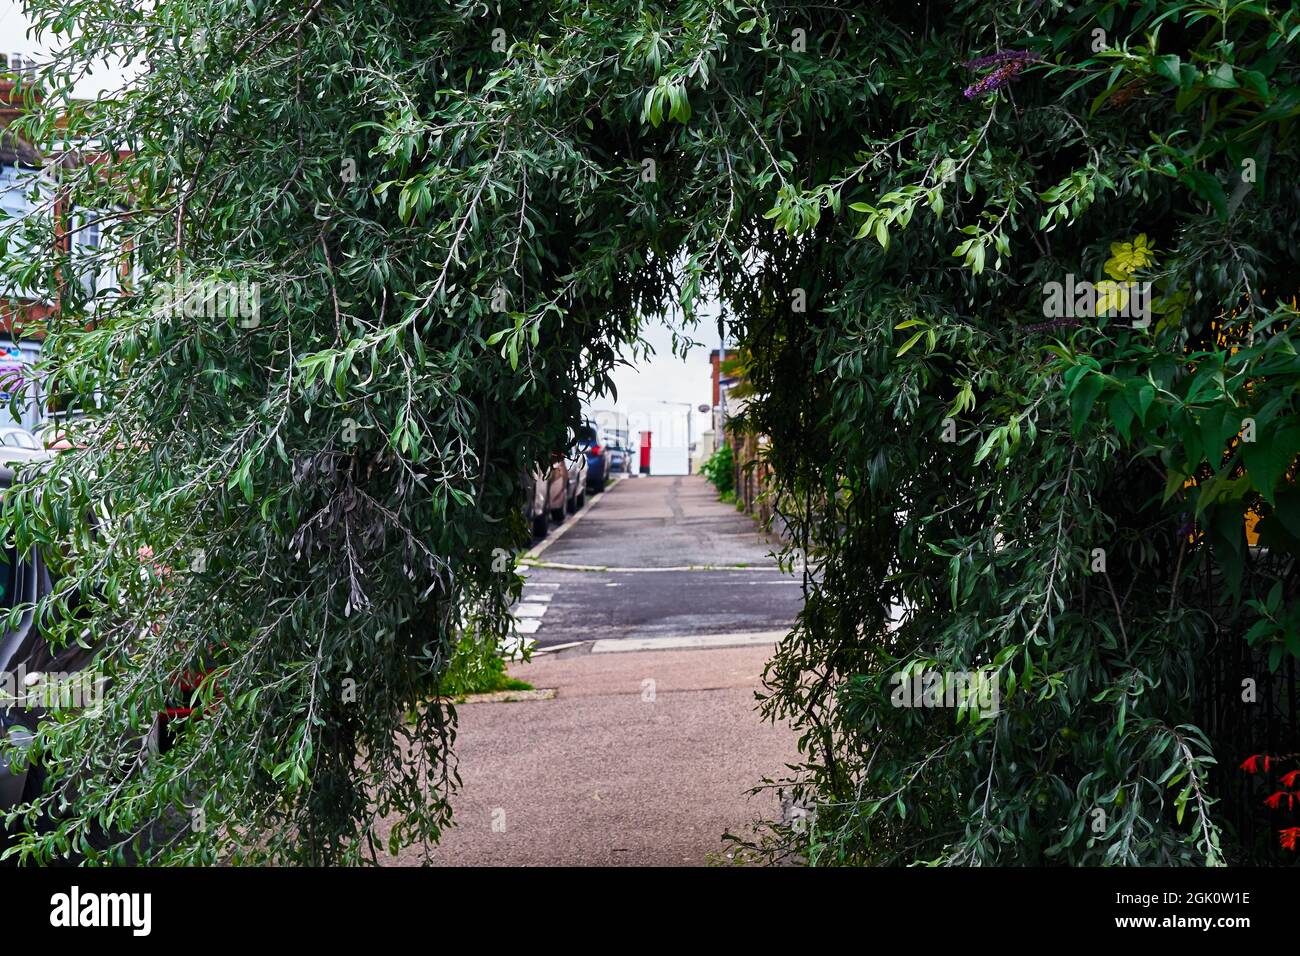 A pendulous willow leaved pear tree (pyrus salicifolia - pendula) forms a tunnel on the pavement Stock Photo